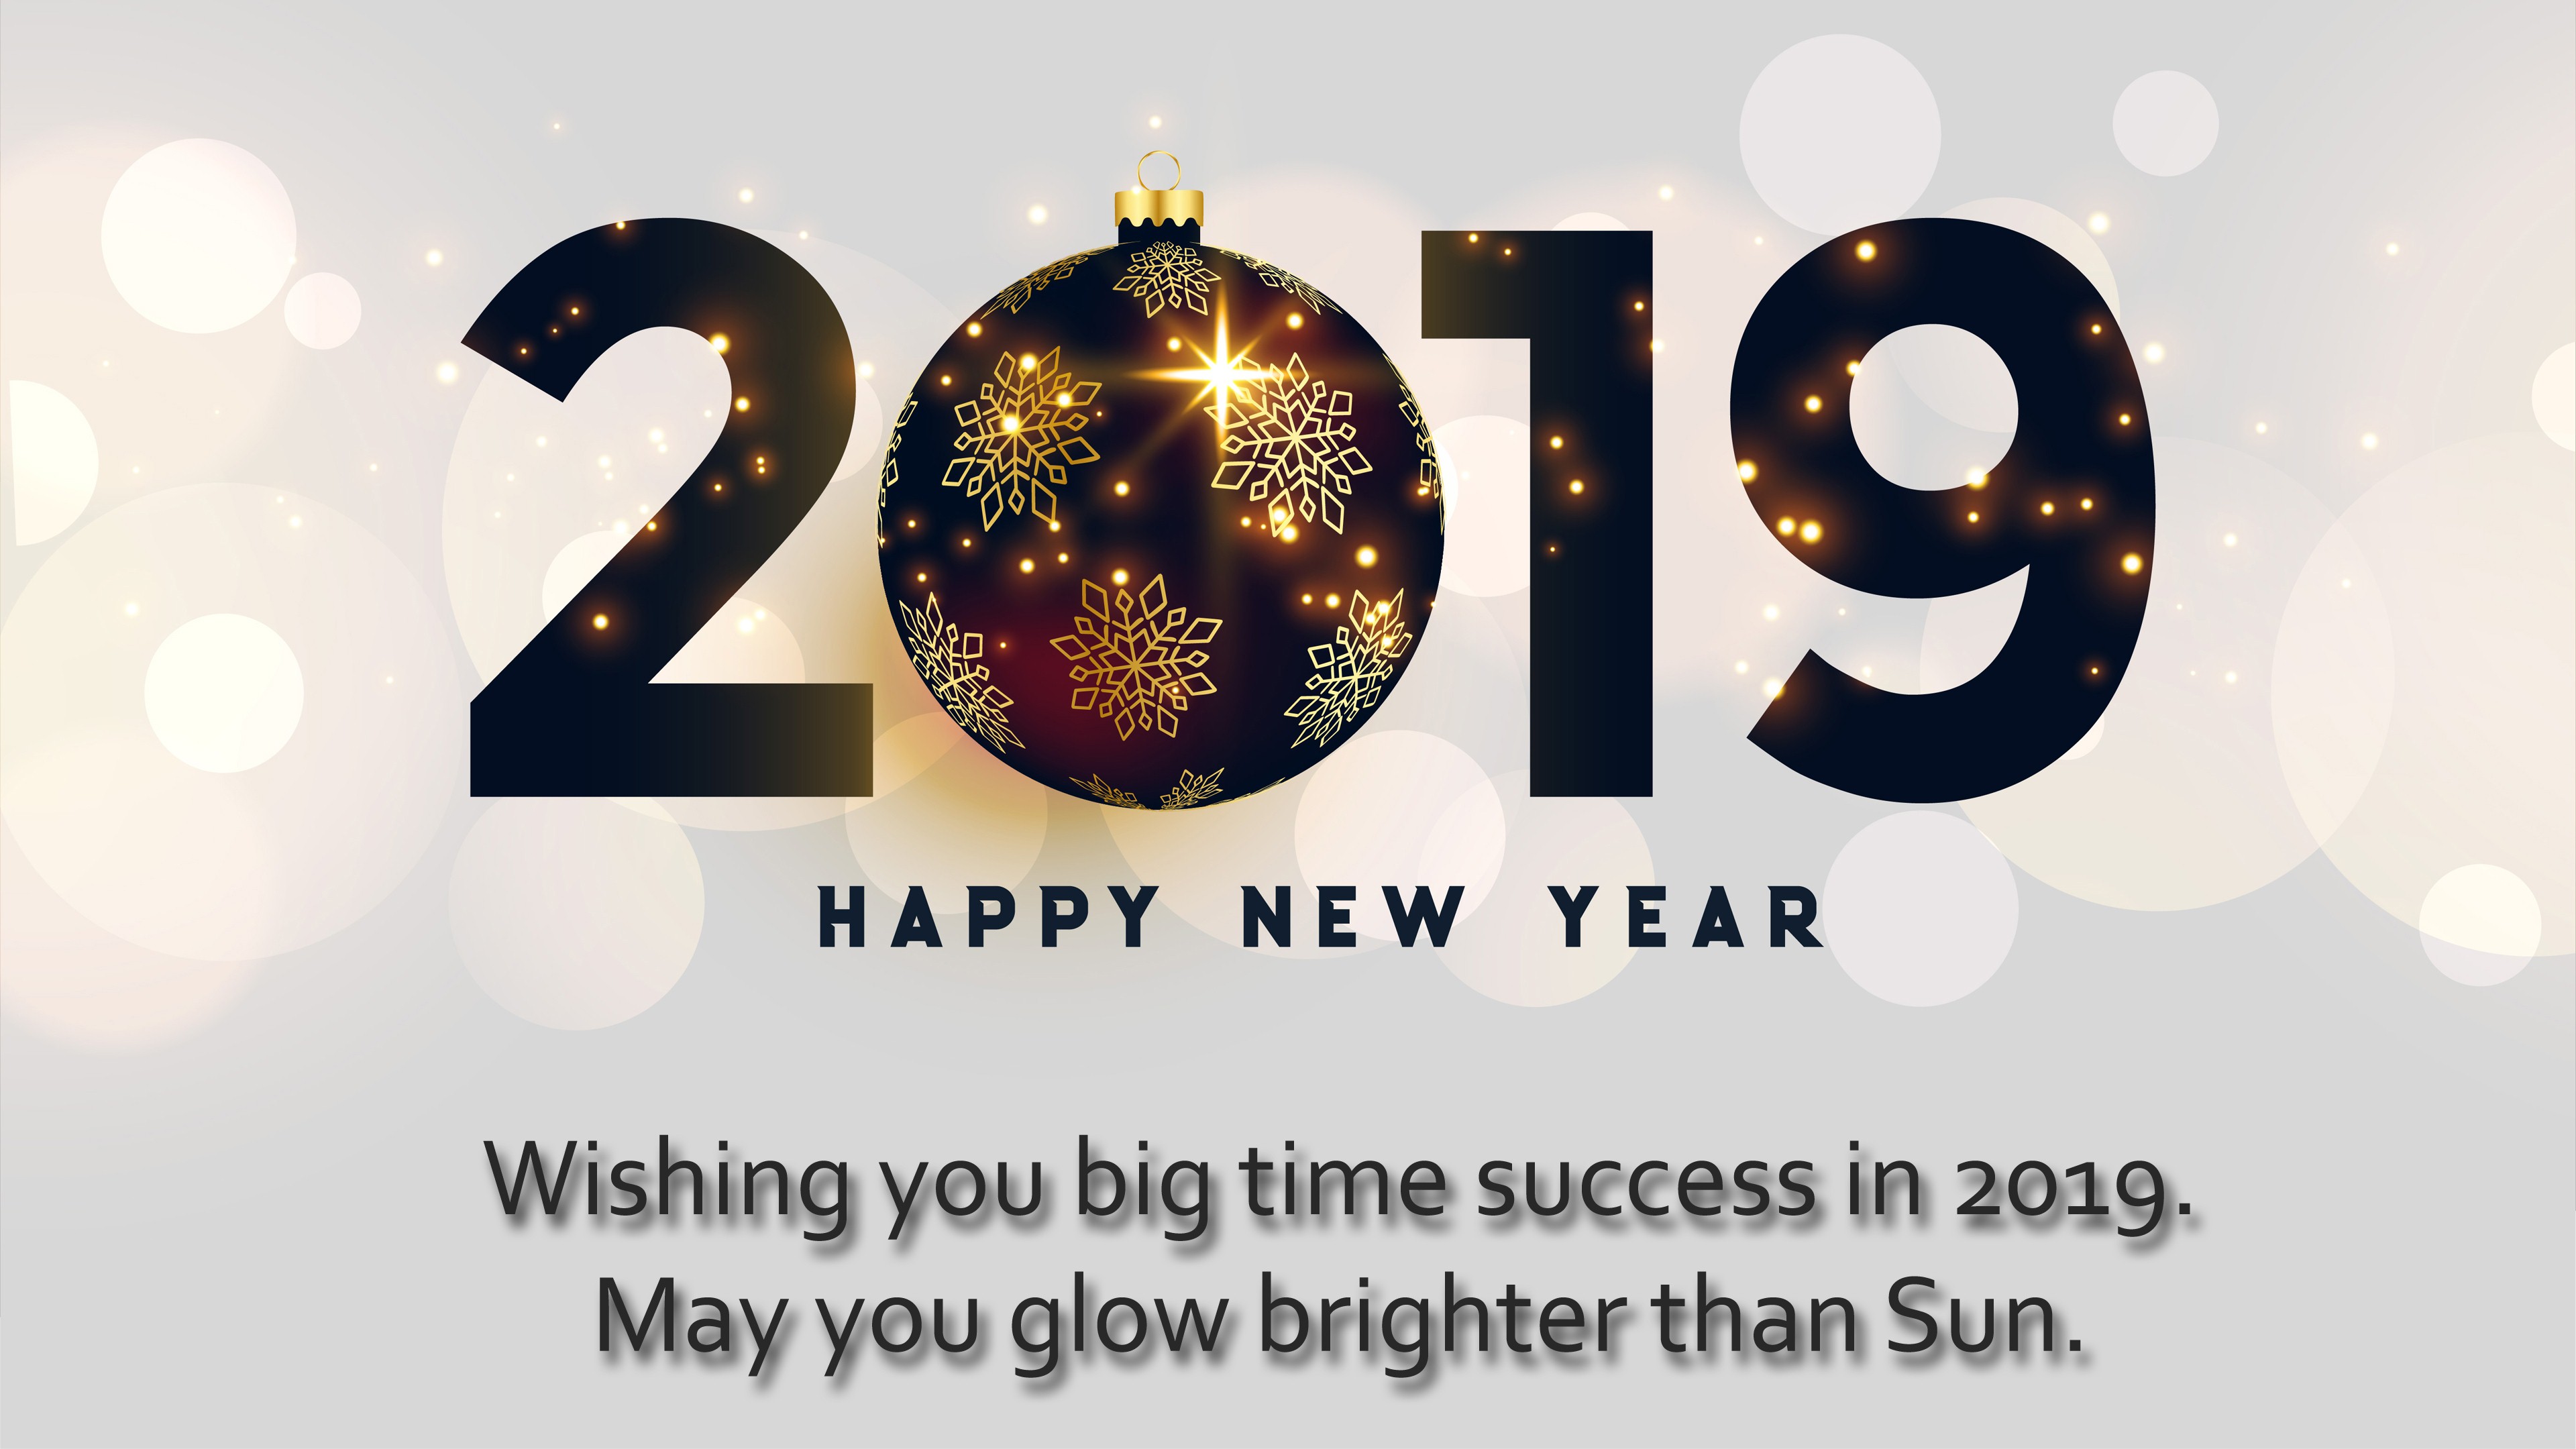 2019 Happy New Year Greeting Message 4k Wallpaper - 2019 Happy New Year  Wallpaper Hd - 3840x2160 Wallpaper 